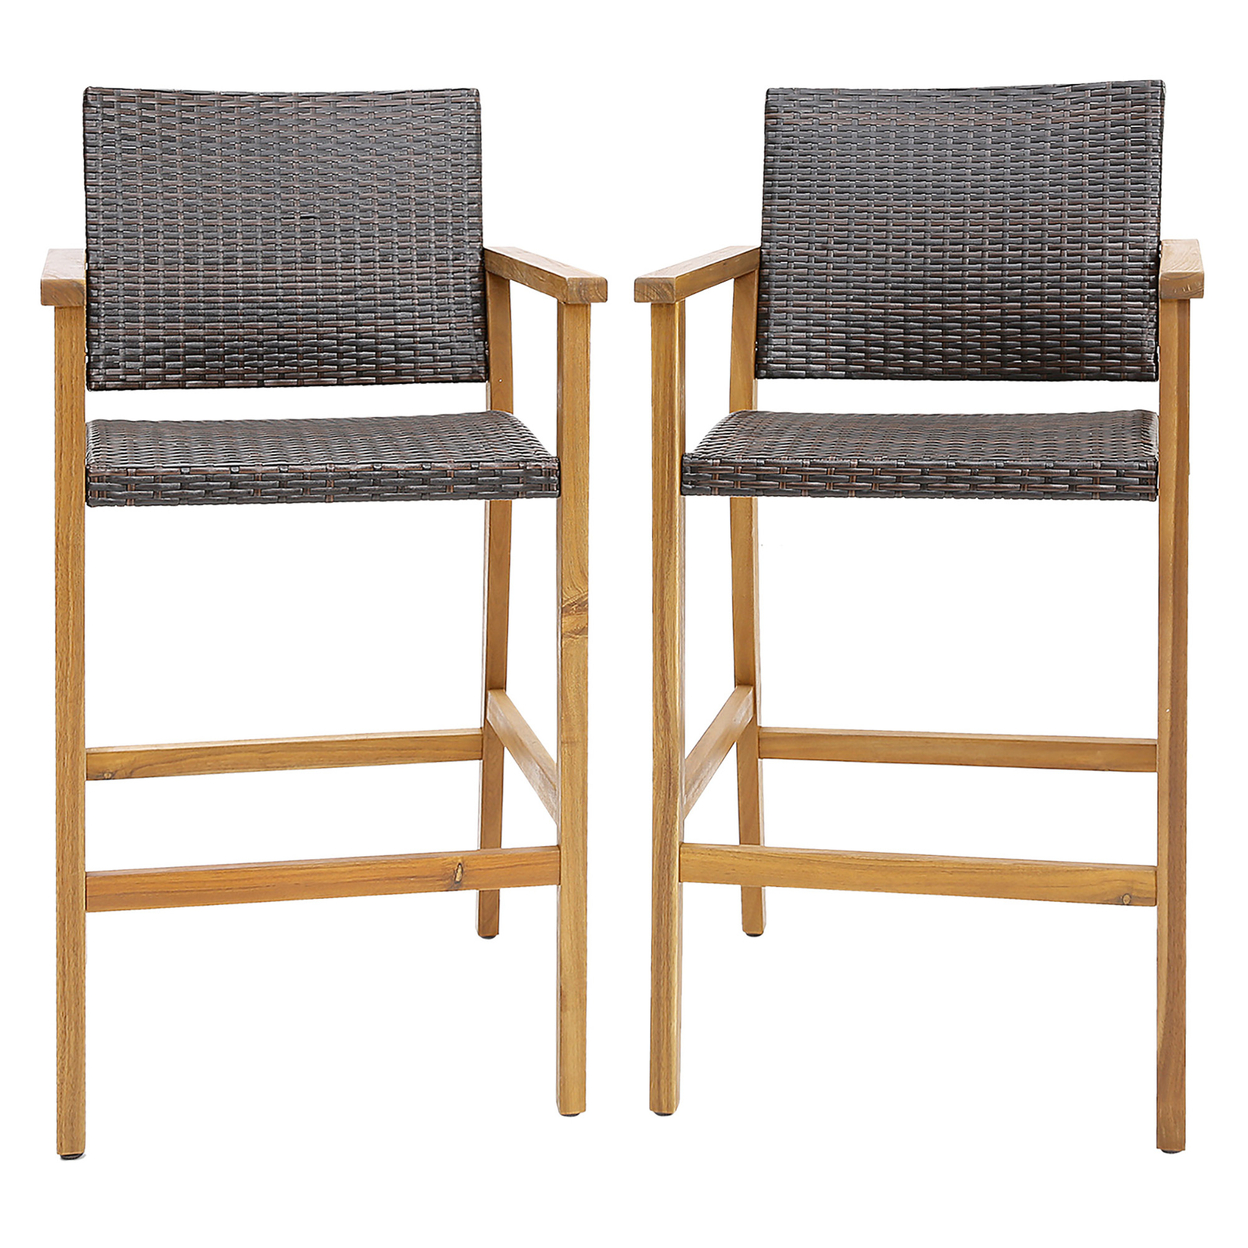 Patio Rattan Bar Stool Set Of 2 Outdoor PE Wicker Bar Chairs W/ Armrests & Sturdy Footrests